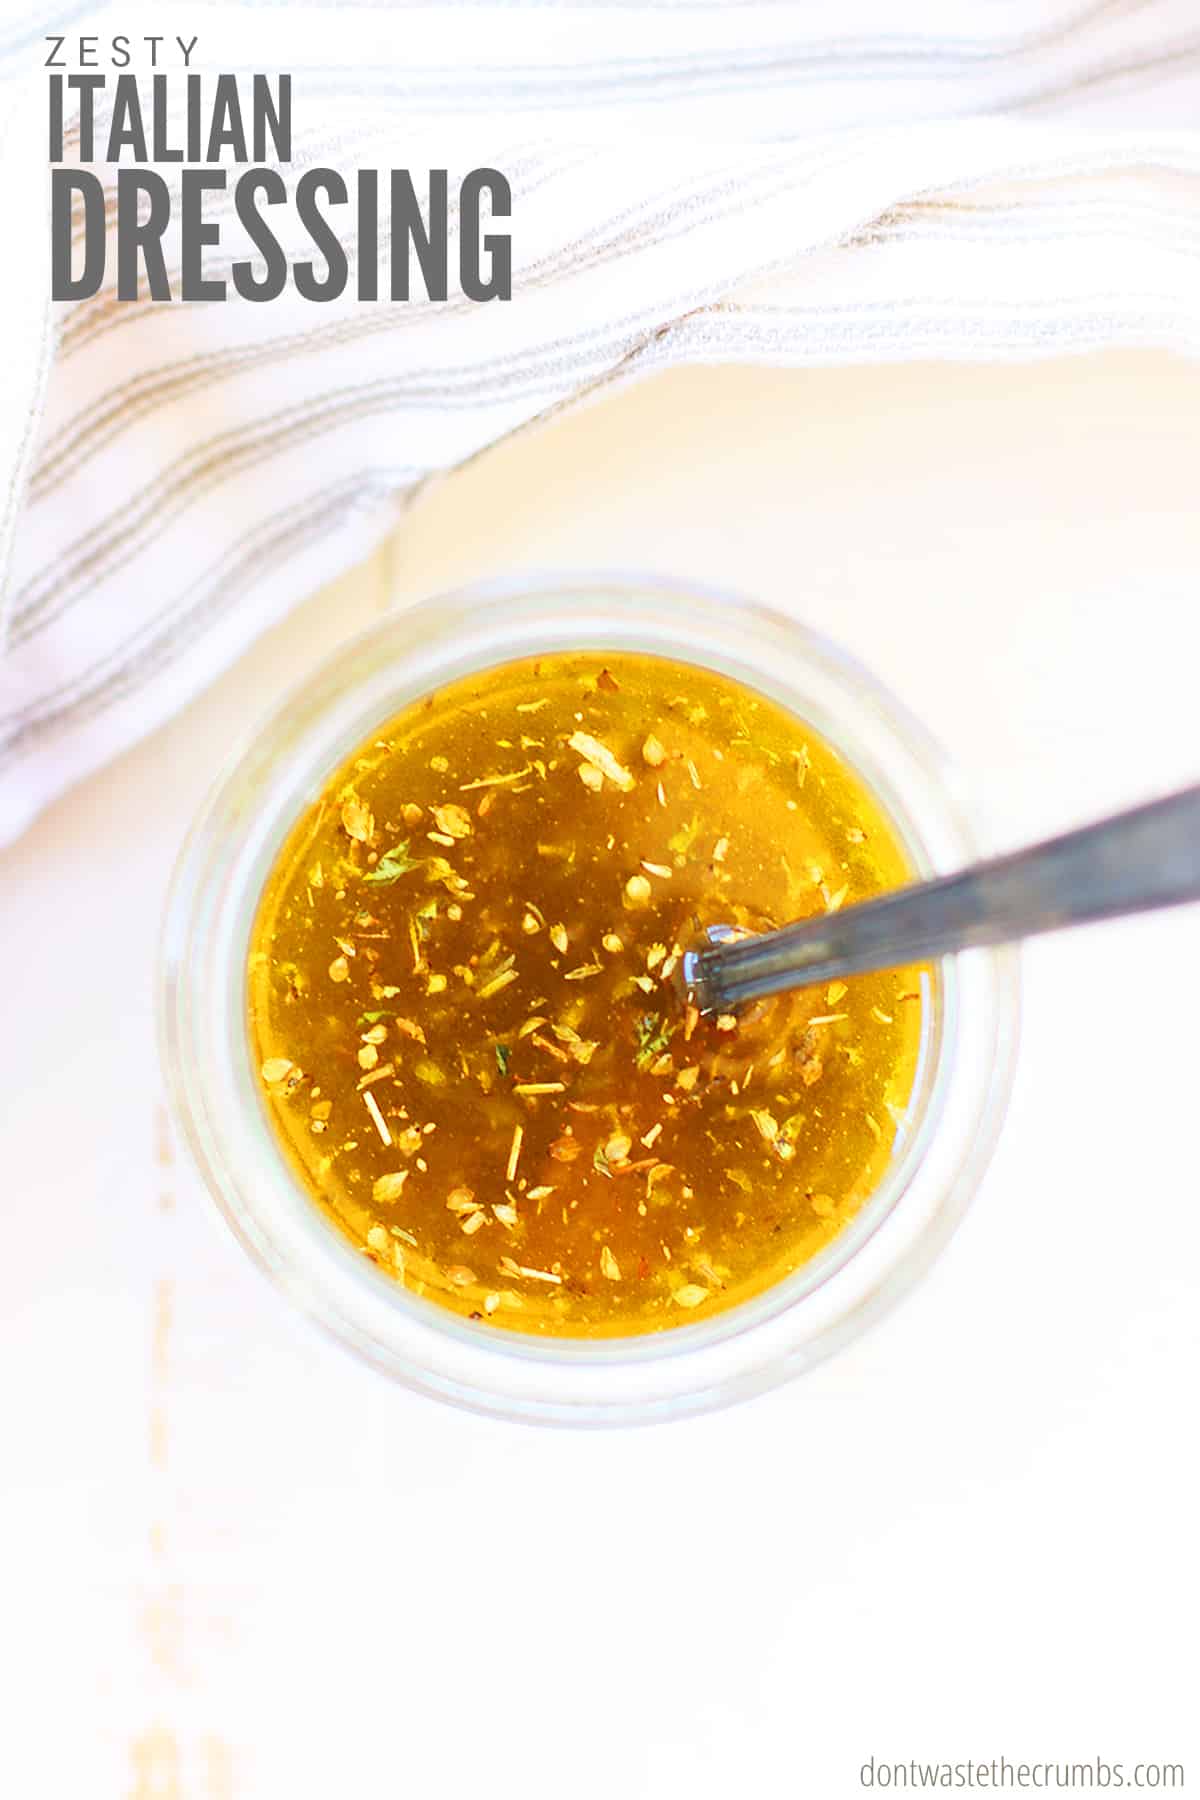 Enjoy this homemade zesty Italian dressing to add more kick to your salads and marinades,